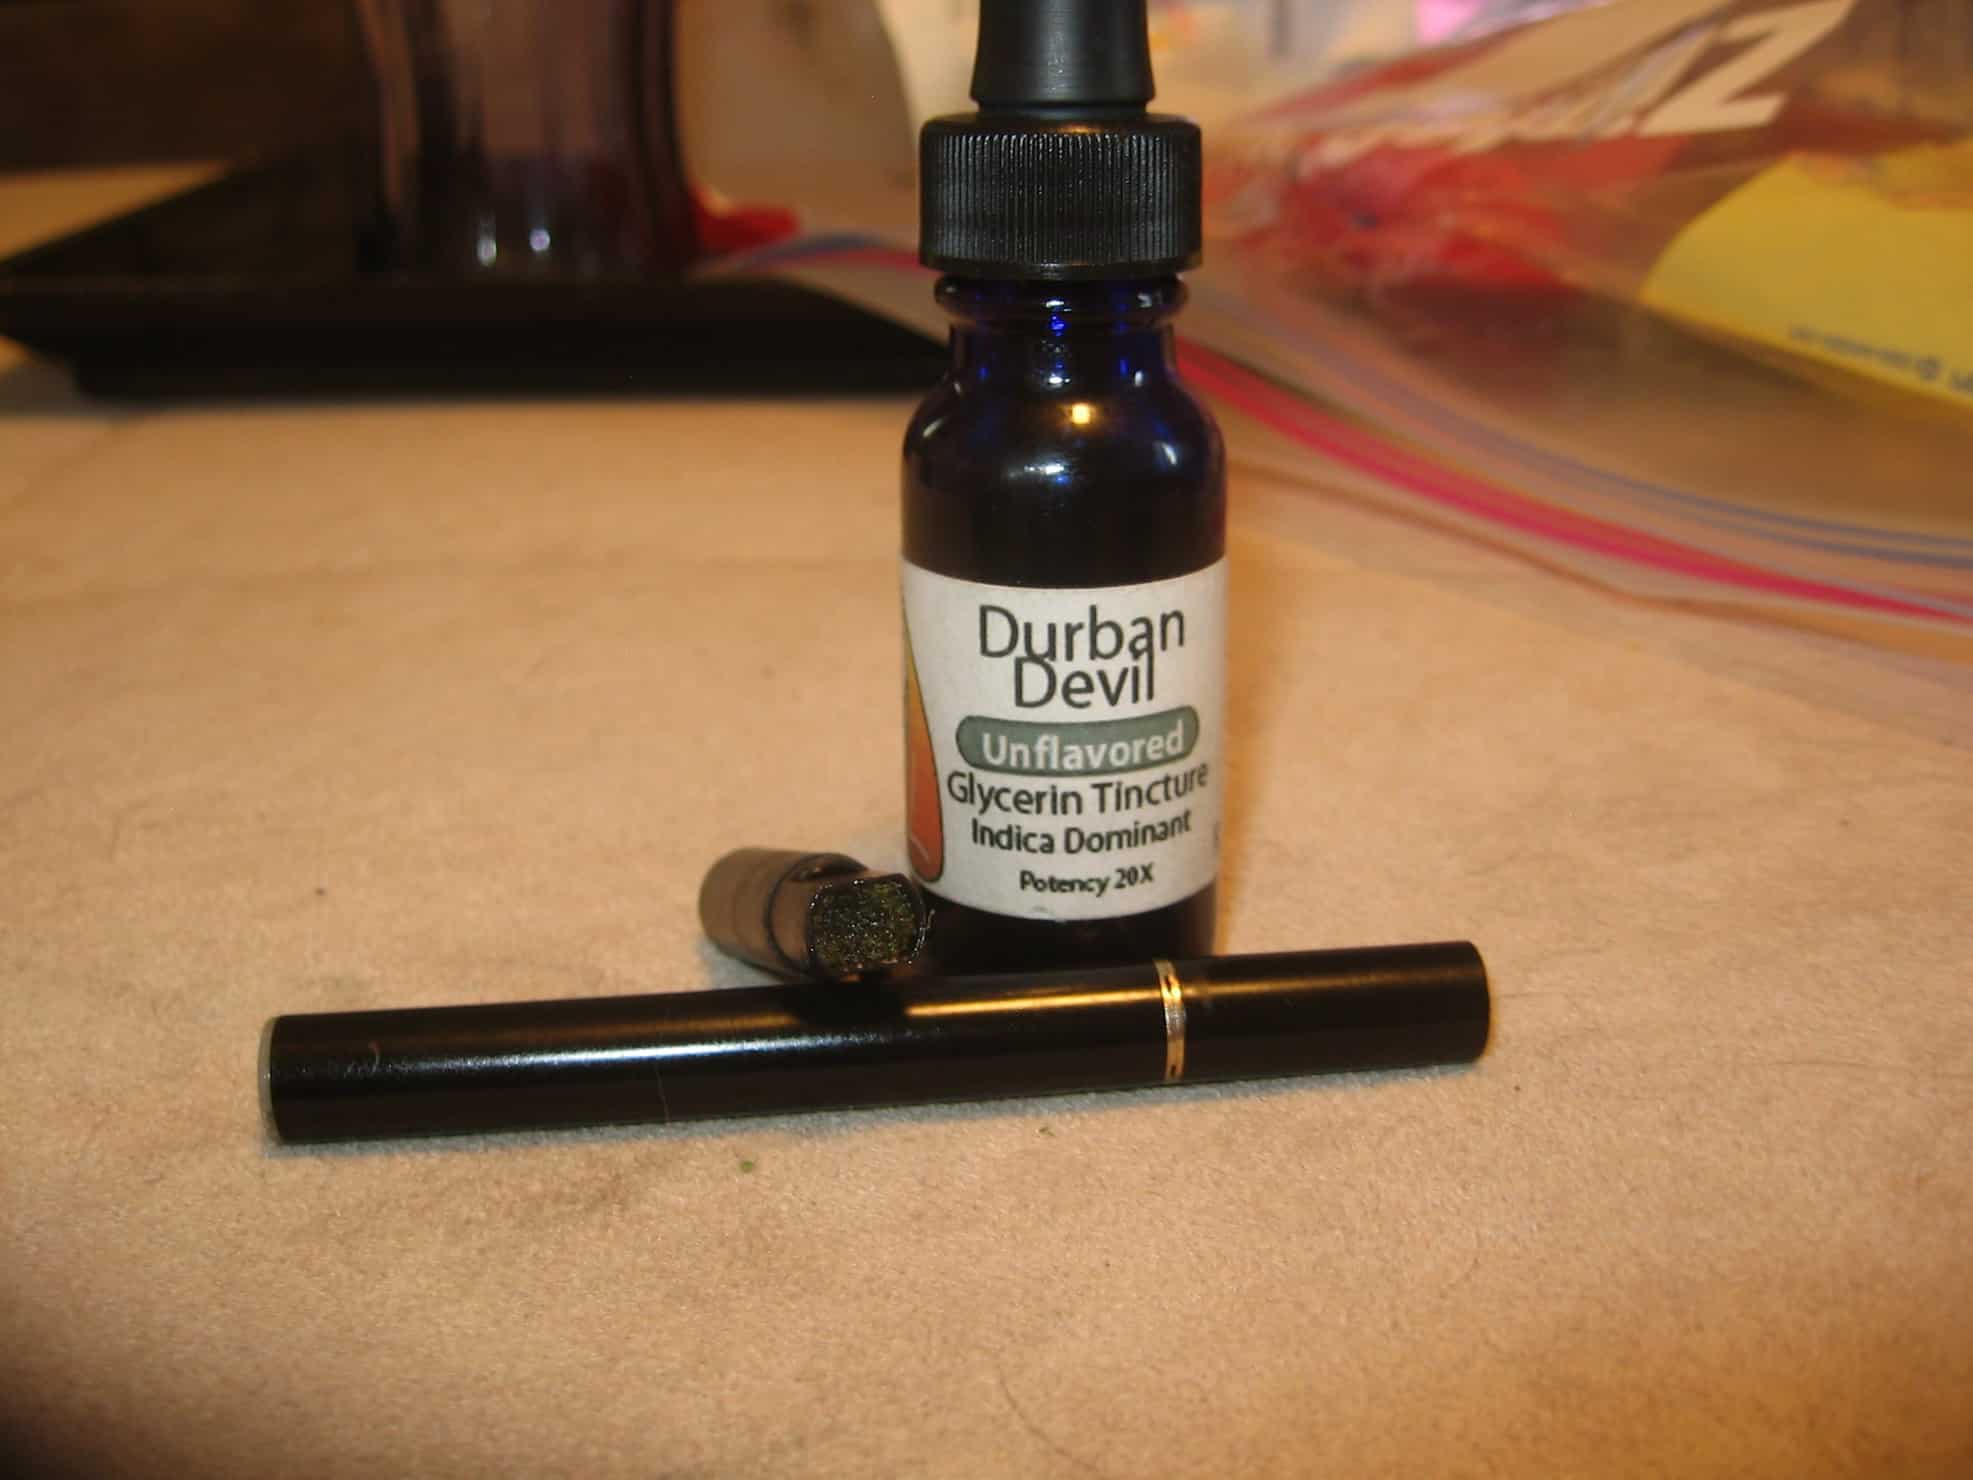 Steps to Making Cannabis Tincture